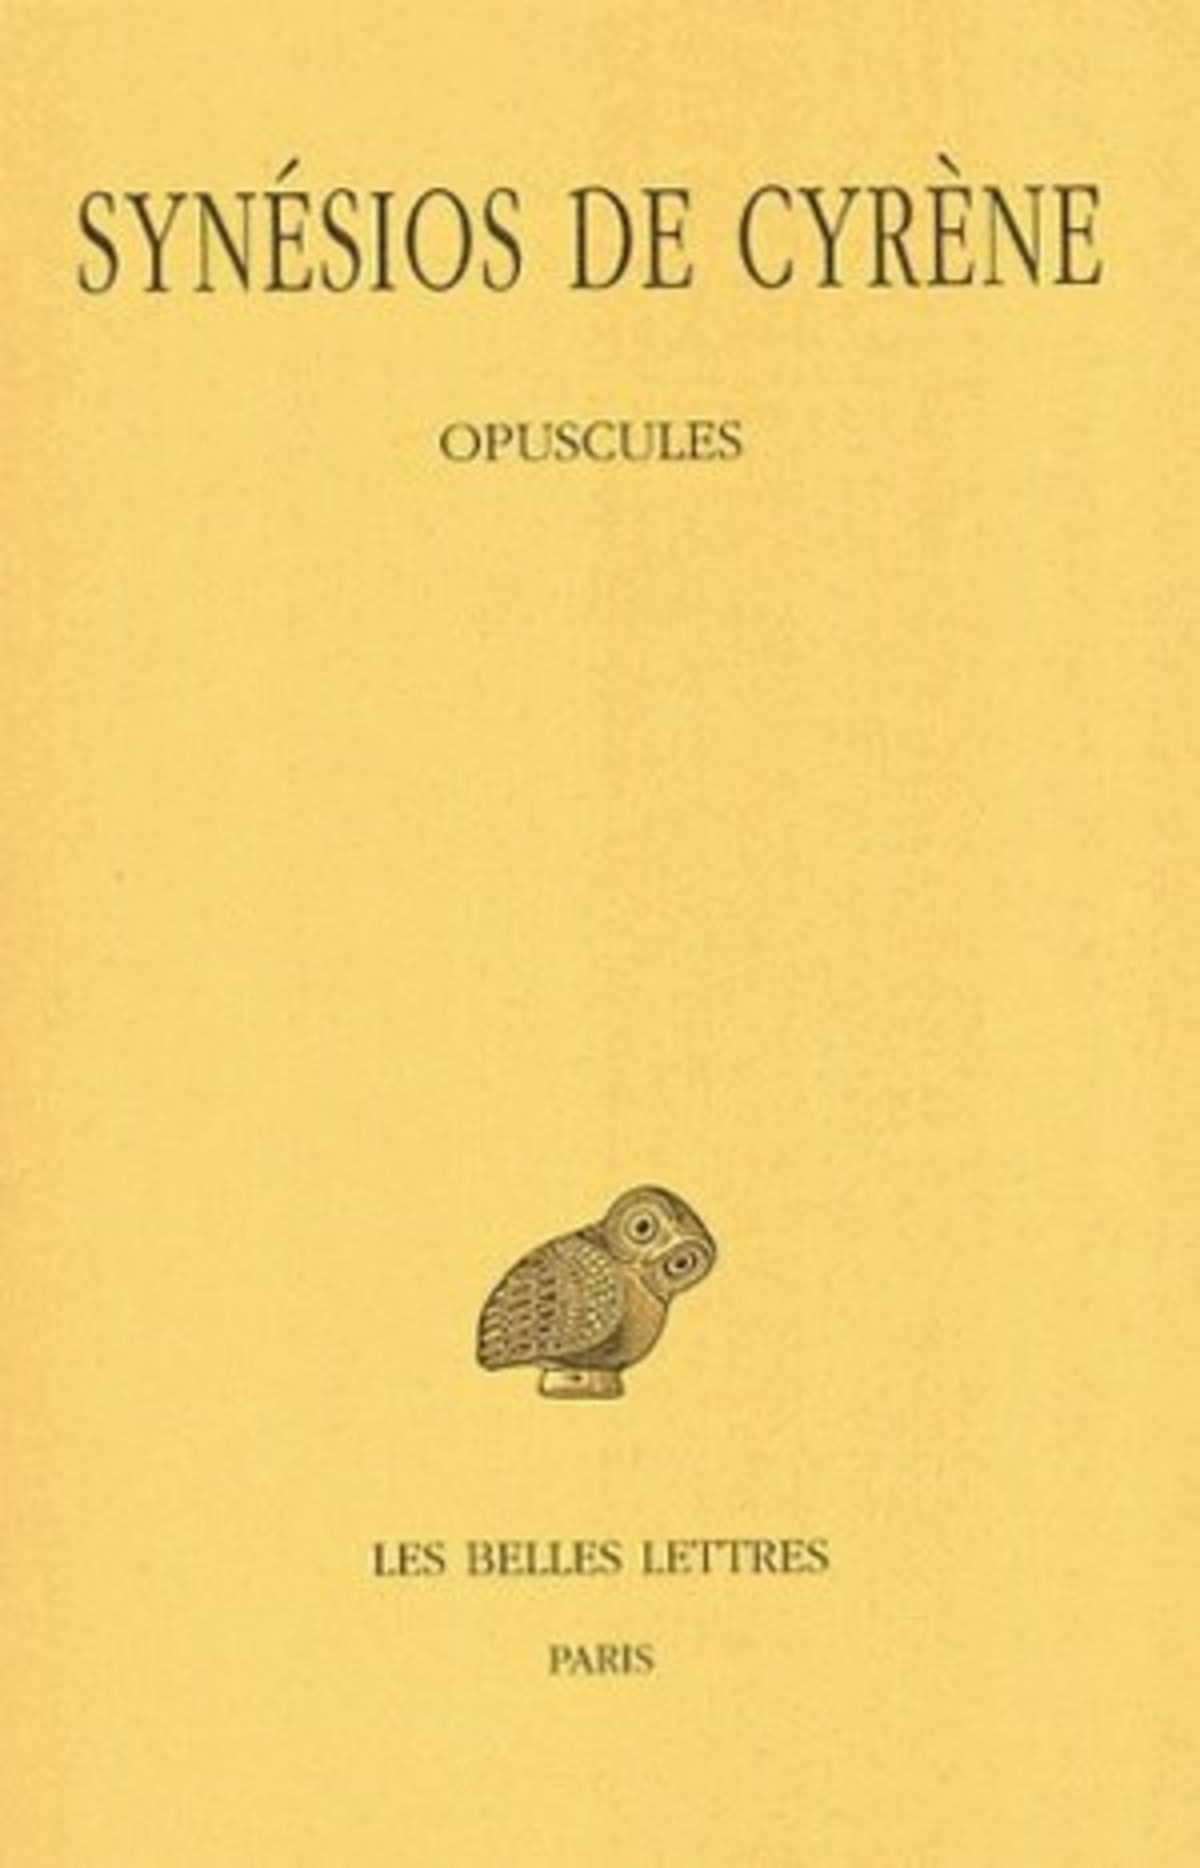 Tome IV : Opuscules I